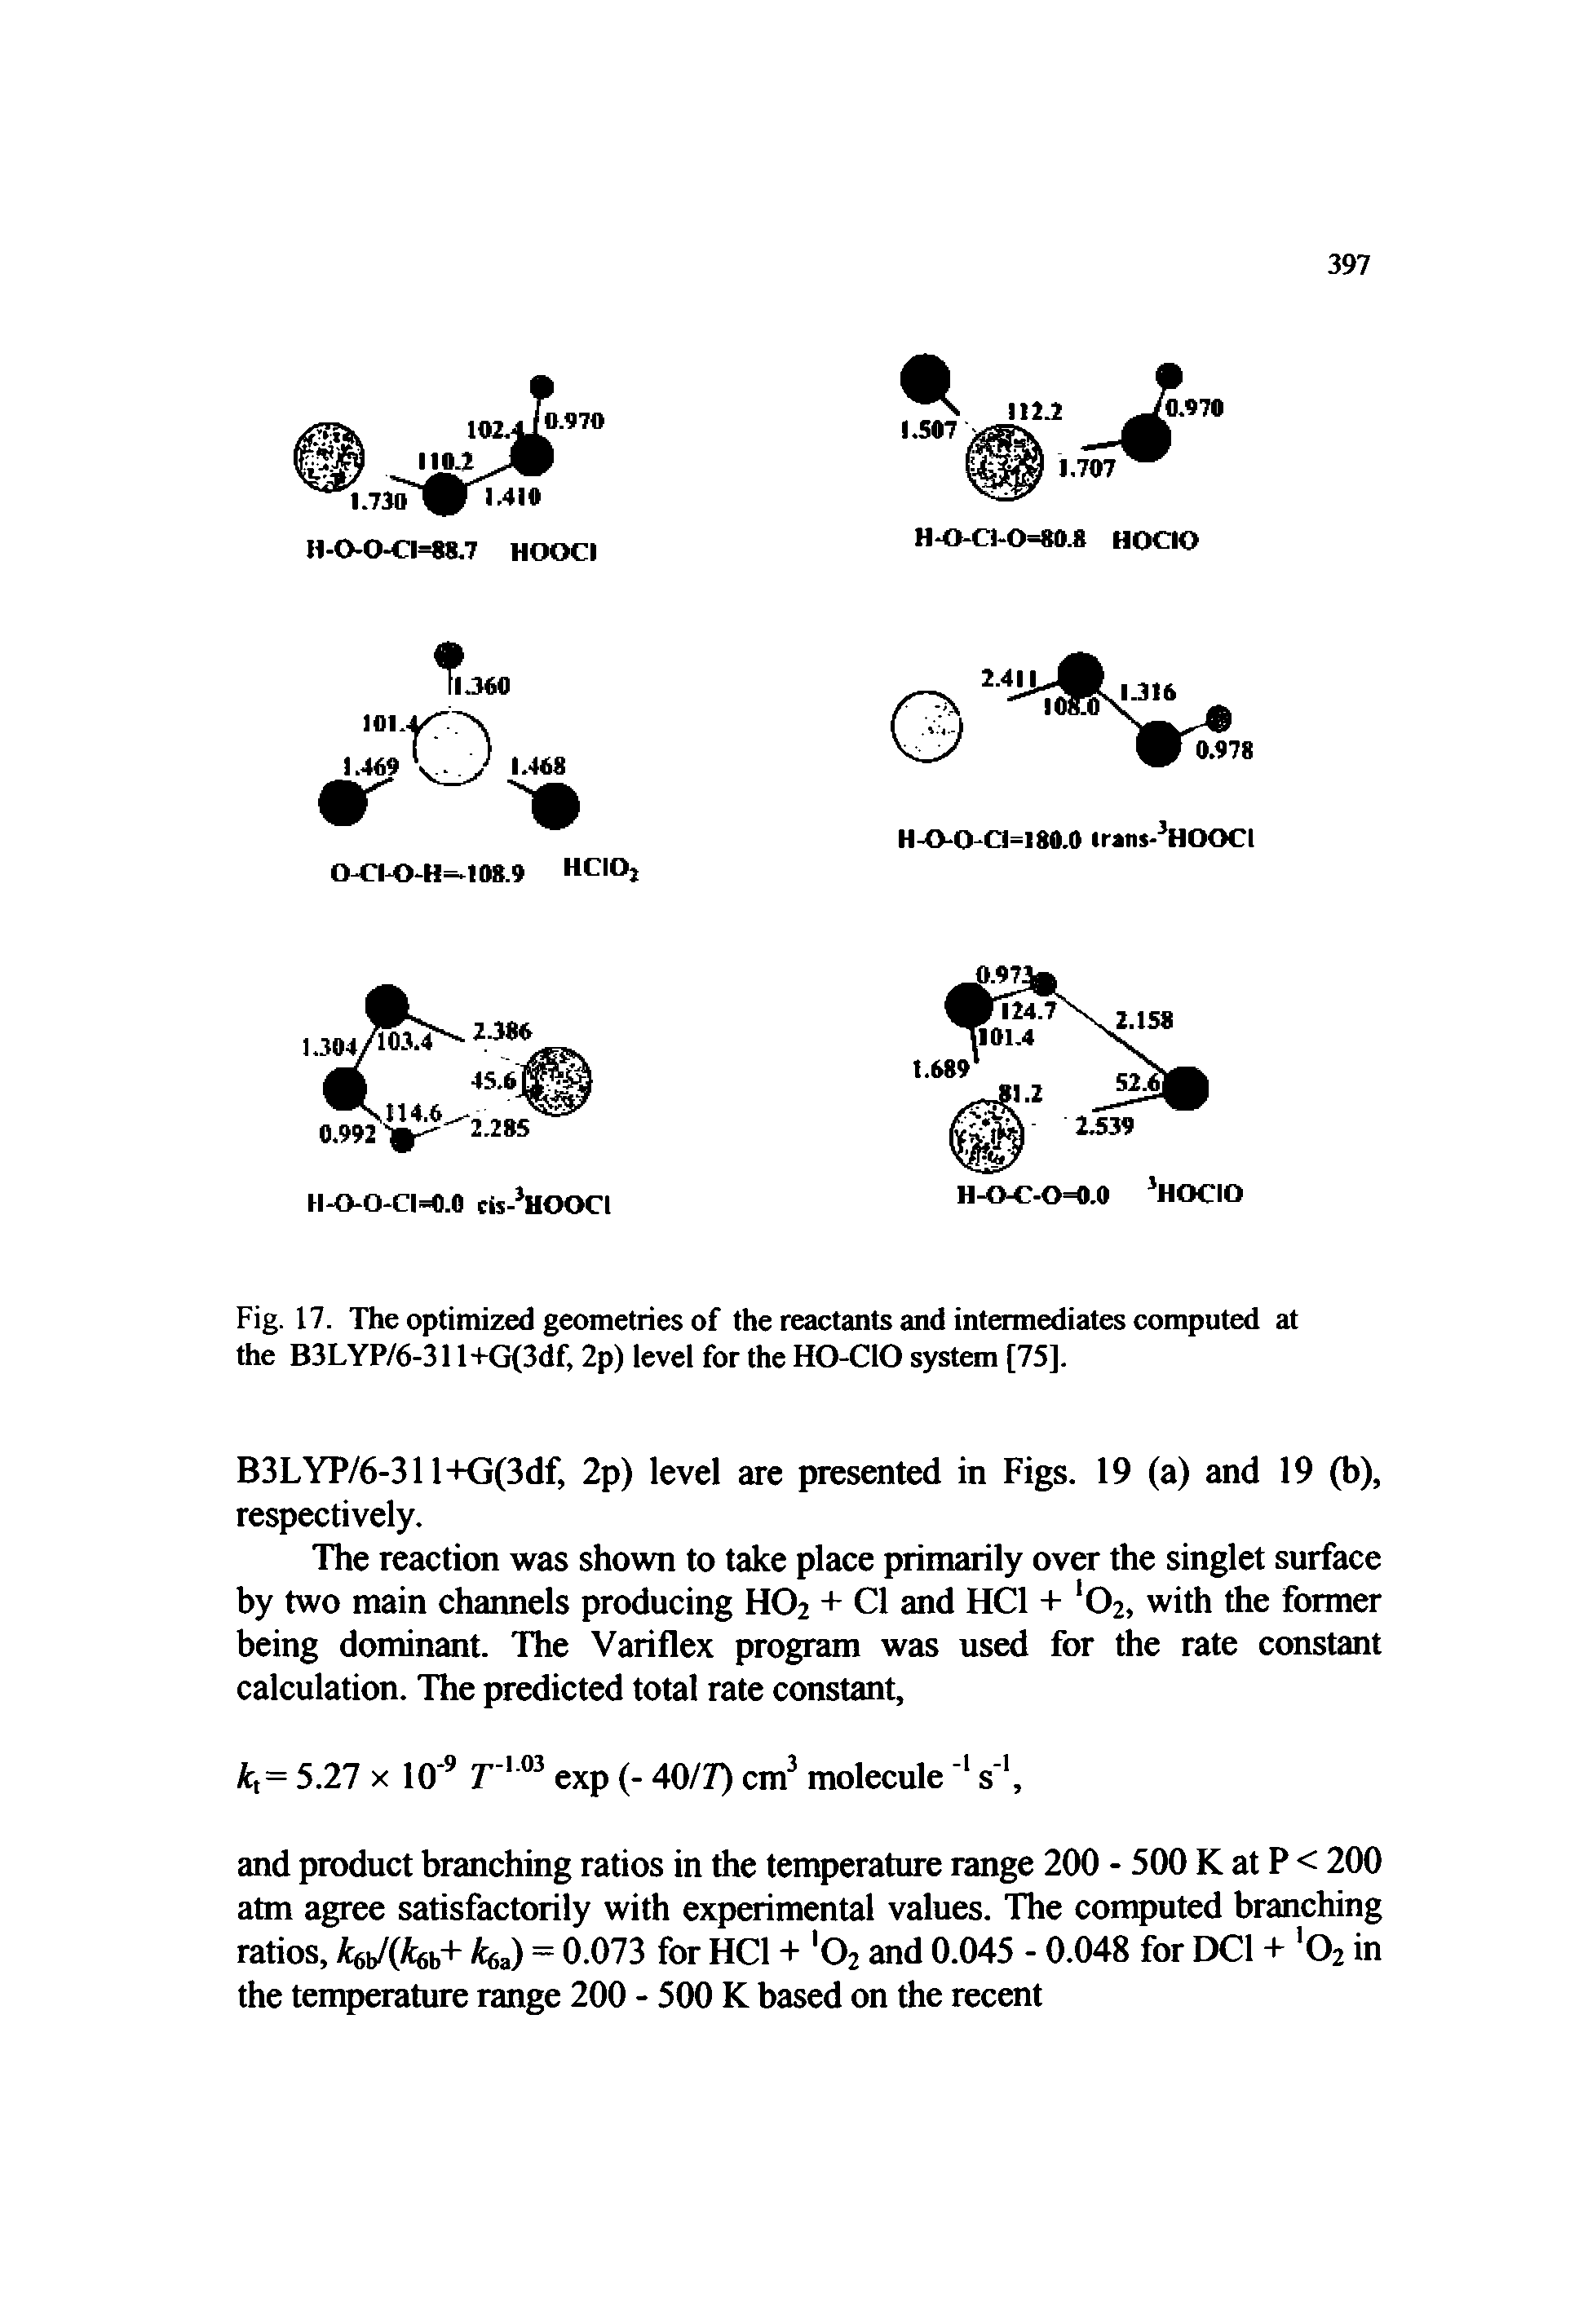 Fig. 17. The optimized geometries of the reactants and intermediates computed at the B3LYP/6-311+G(3df, 2p) level for the HO-CIO system [75],...